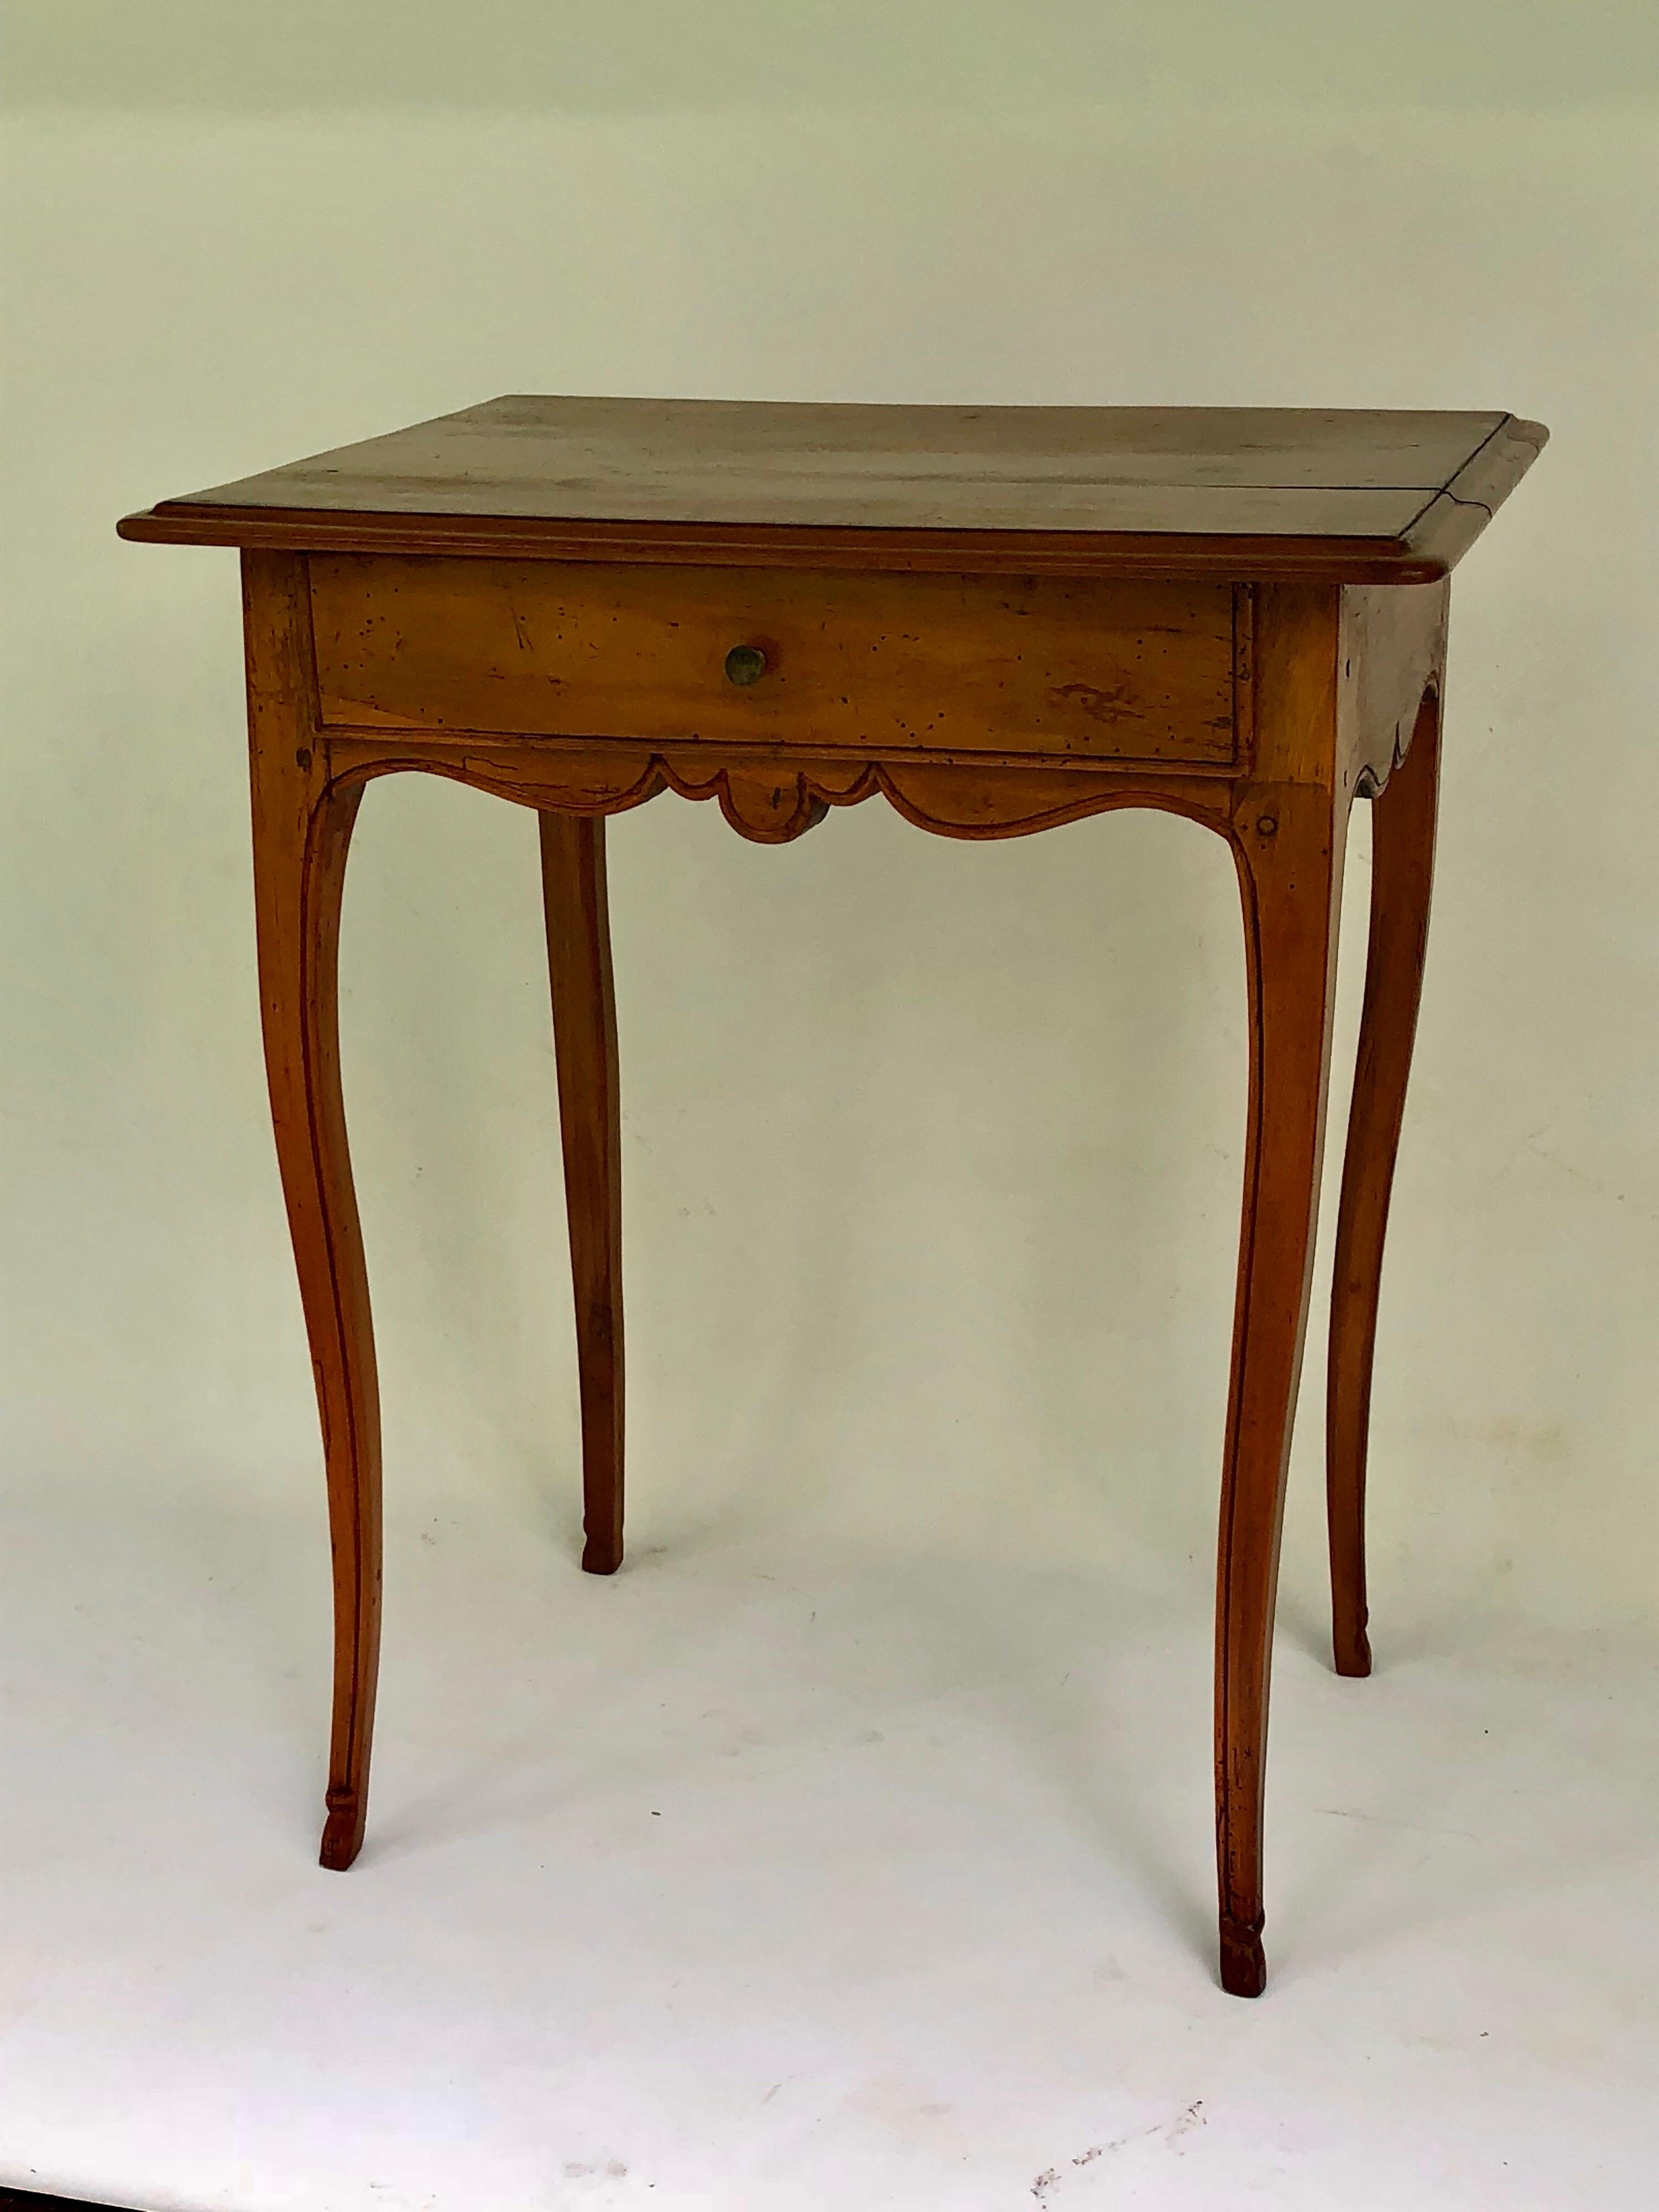 French Louis XV fruitwood table a ecrire. Single drawer fitted with a leather writing surface.